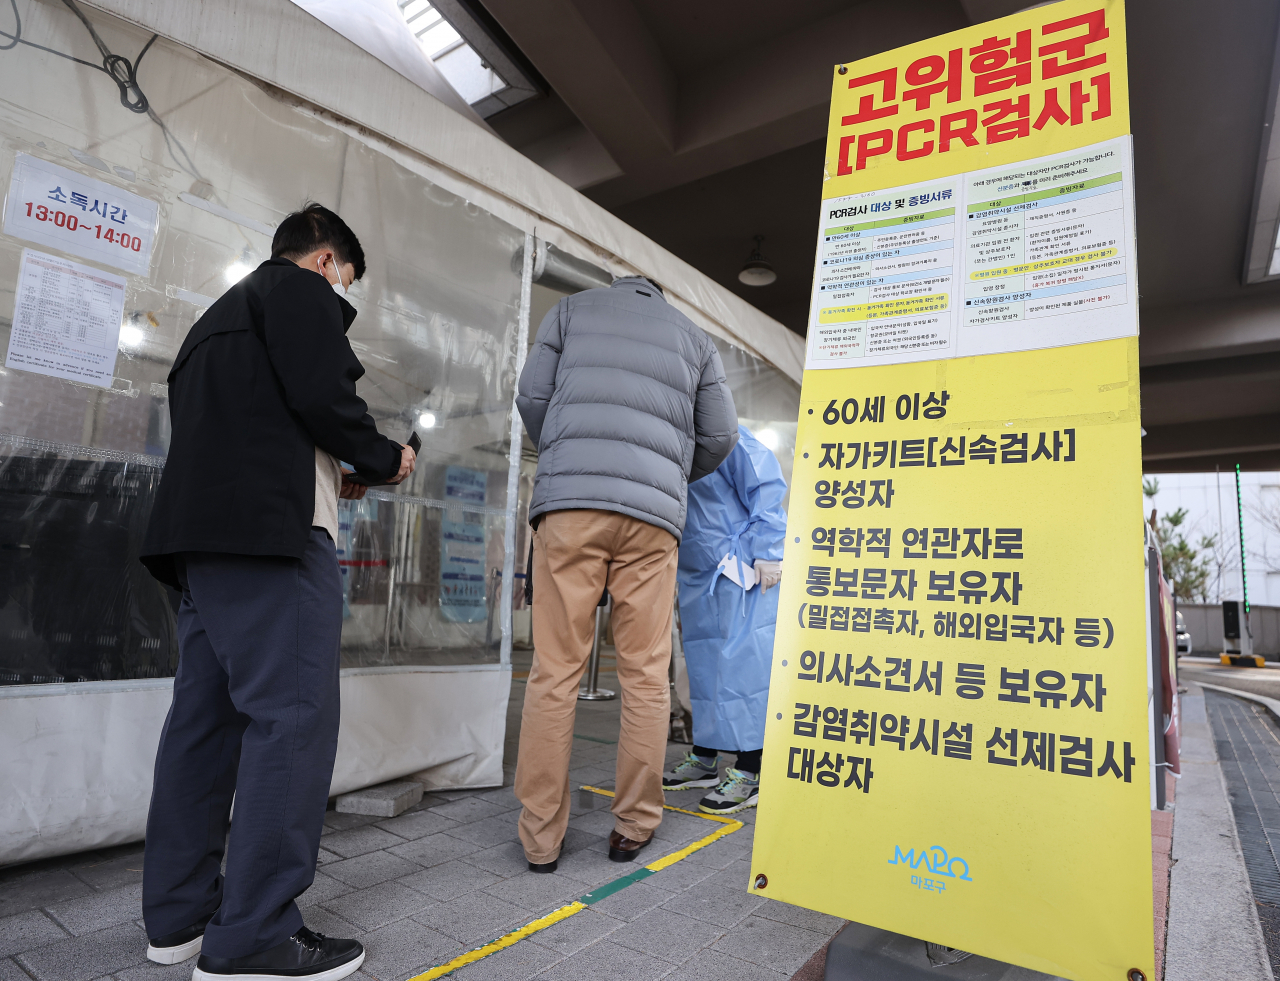 People line up to get tested for COVID-19 at a testing station in Seoul's western district of Mapo on Wednesday. (Yonhap)